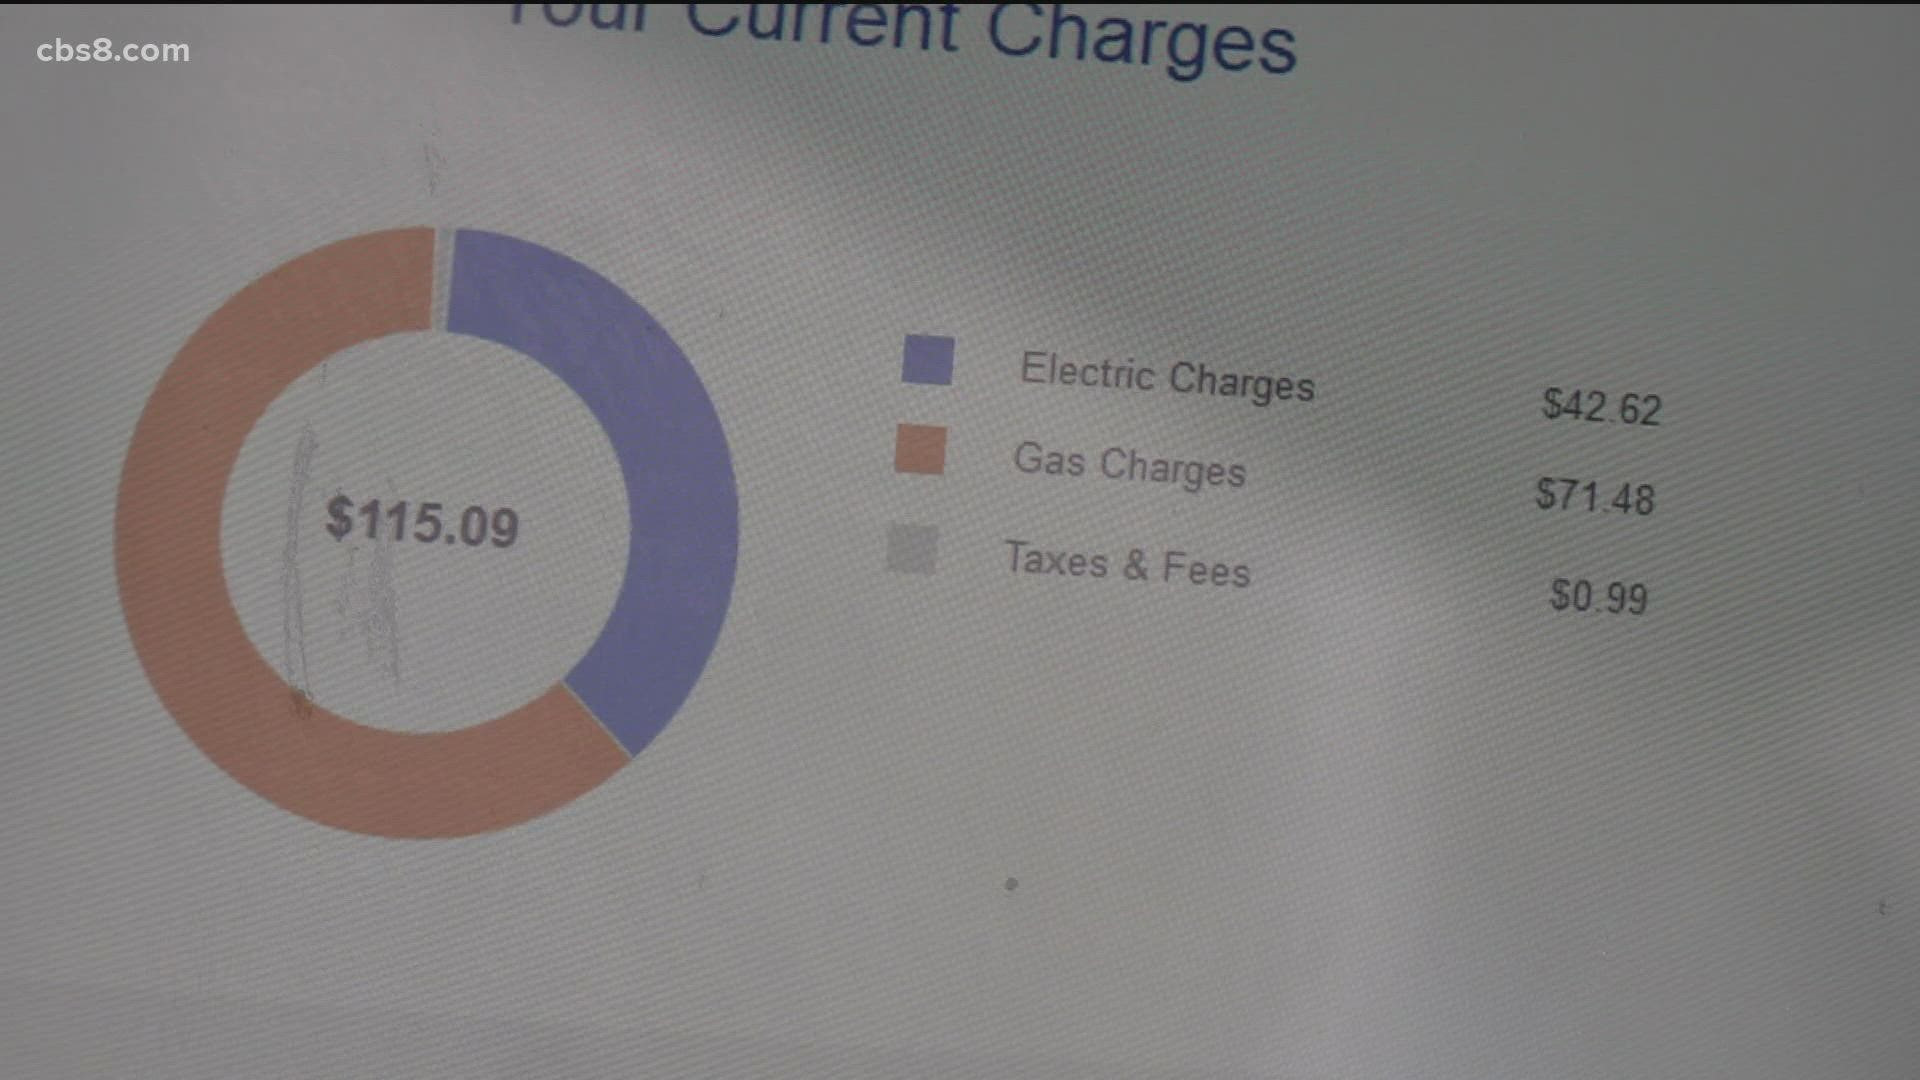 Oceanside woman says she can't get answers from SDG&E; utility says the meter was read correctly